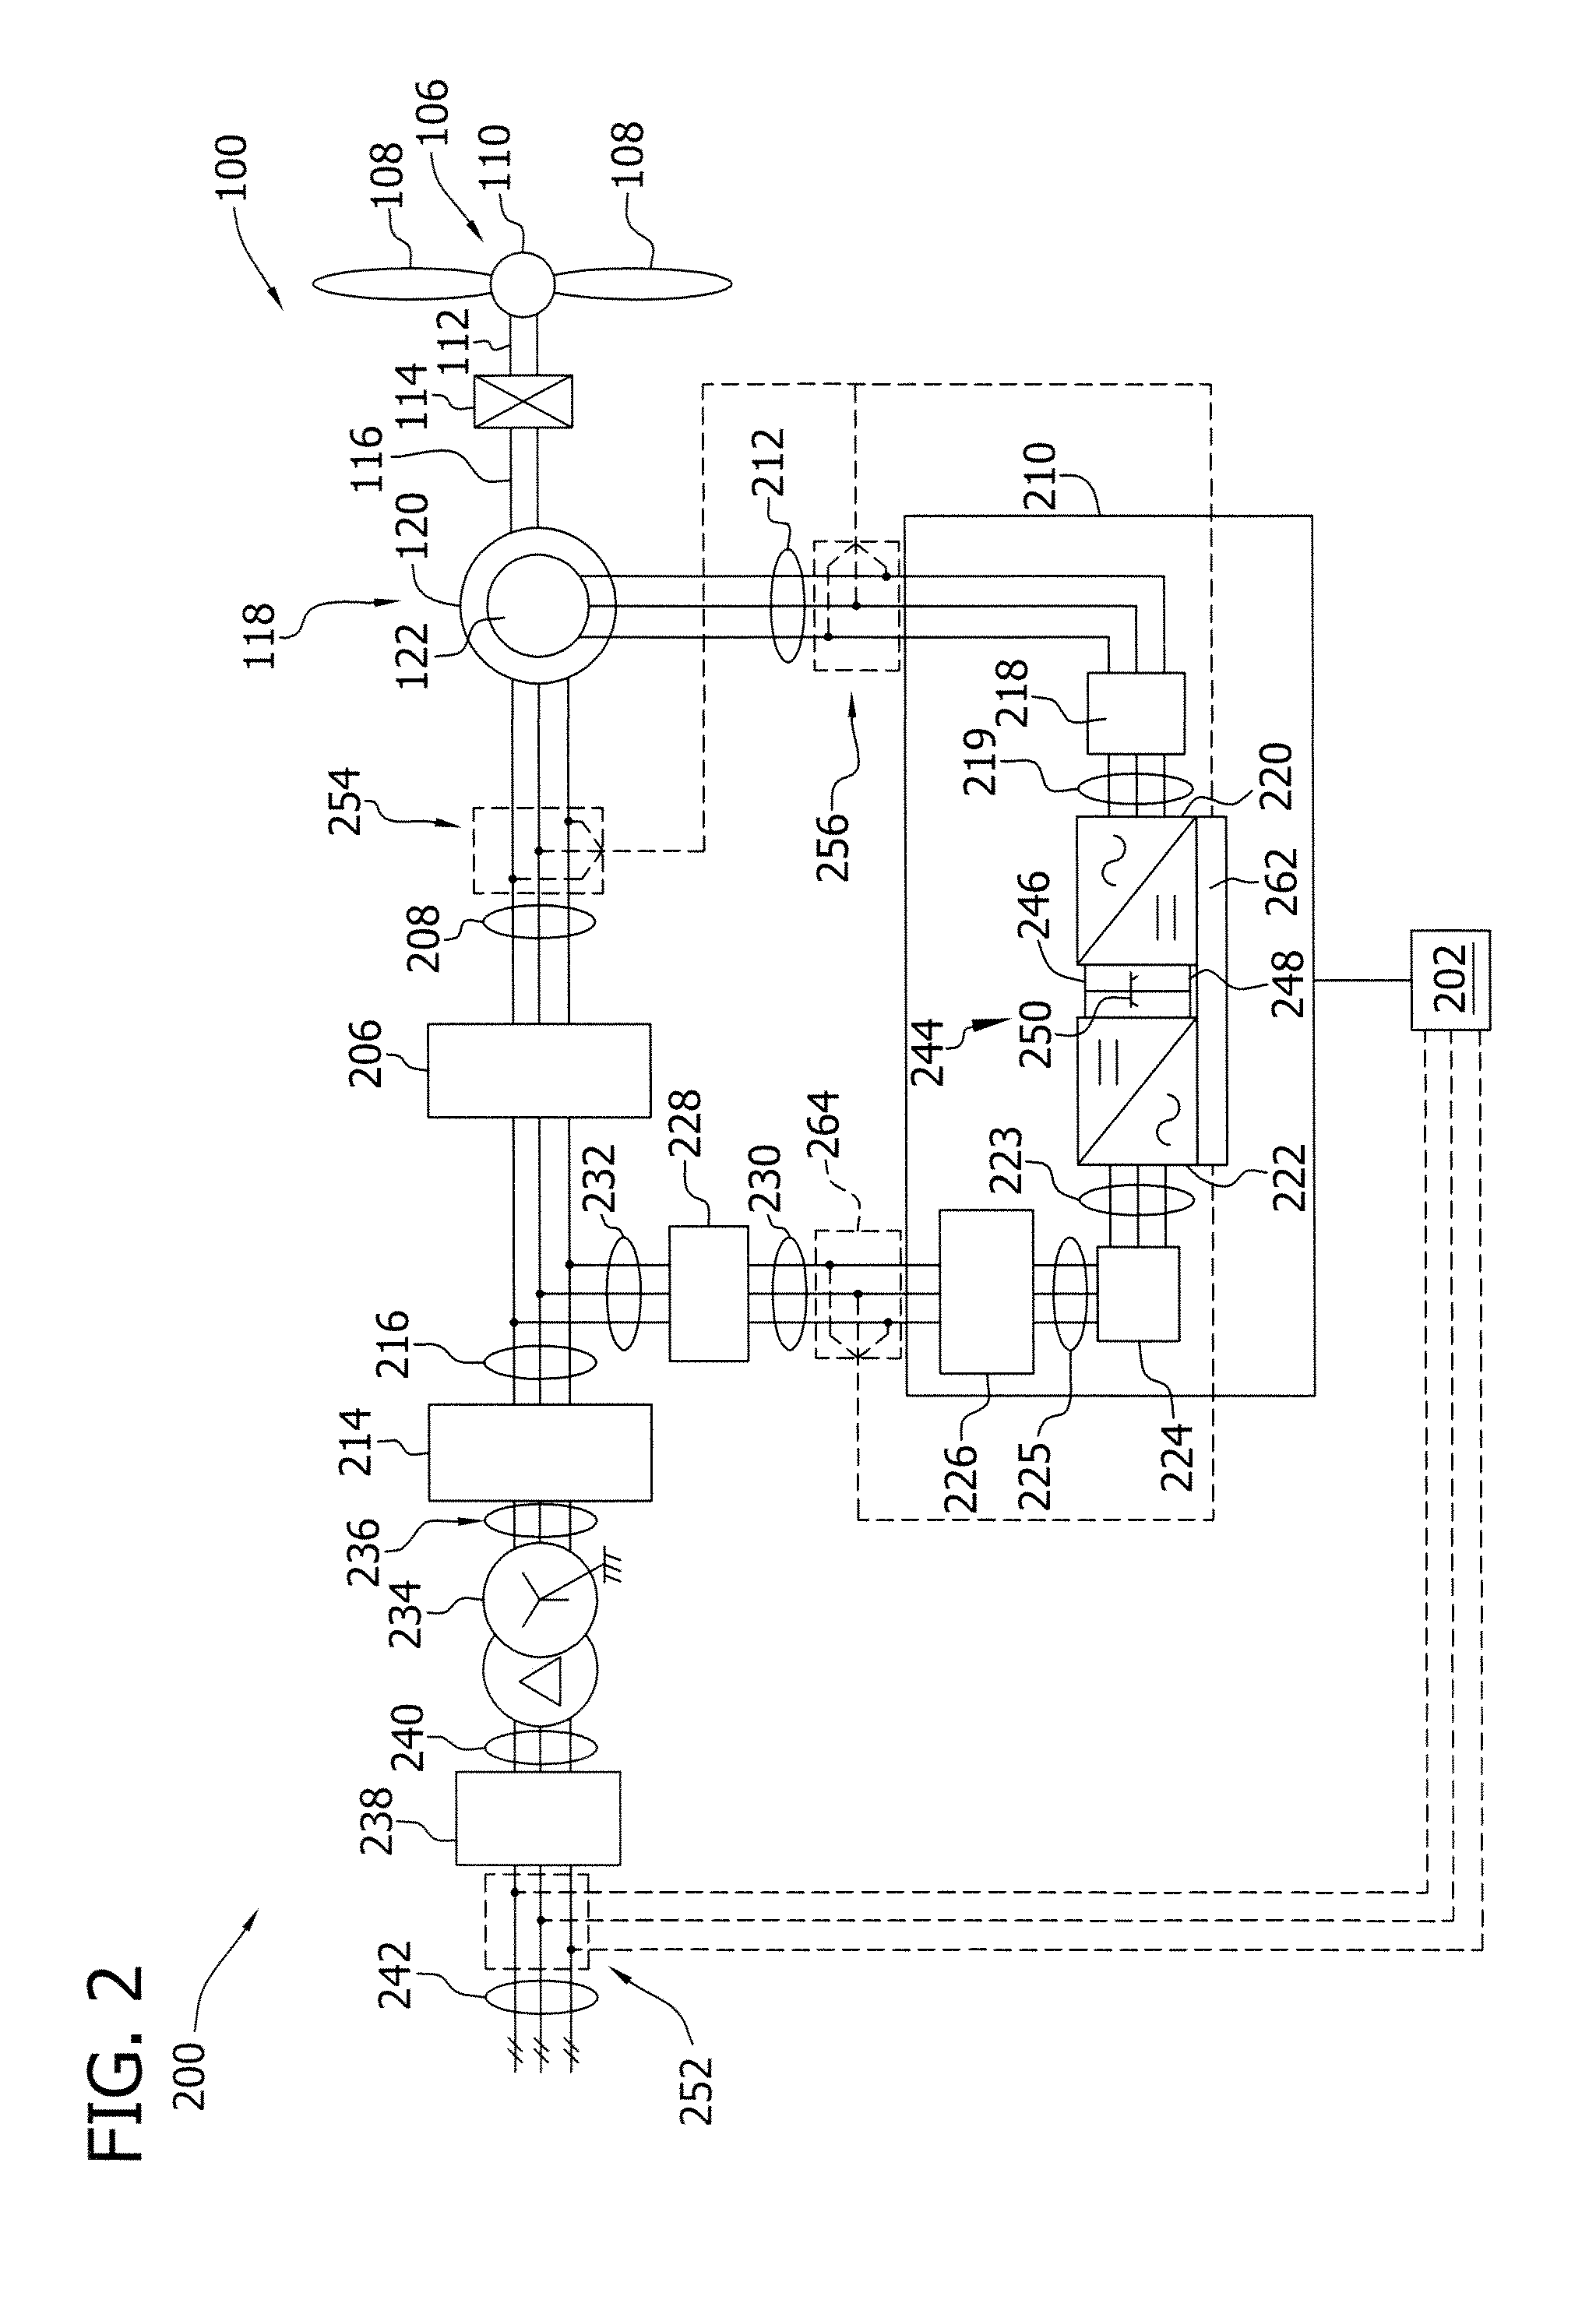 Reactive power controller for controlling reactive power in a wind farm